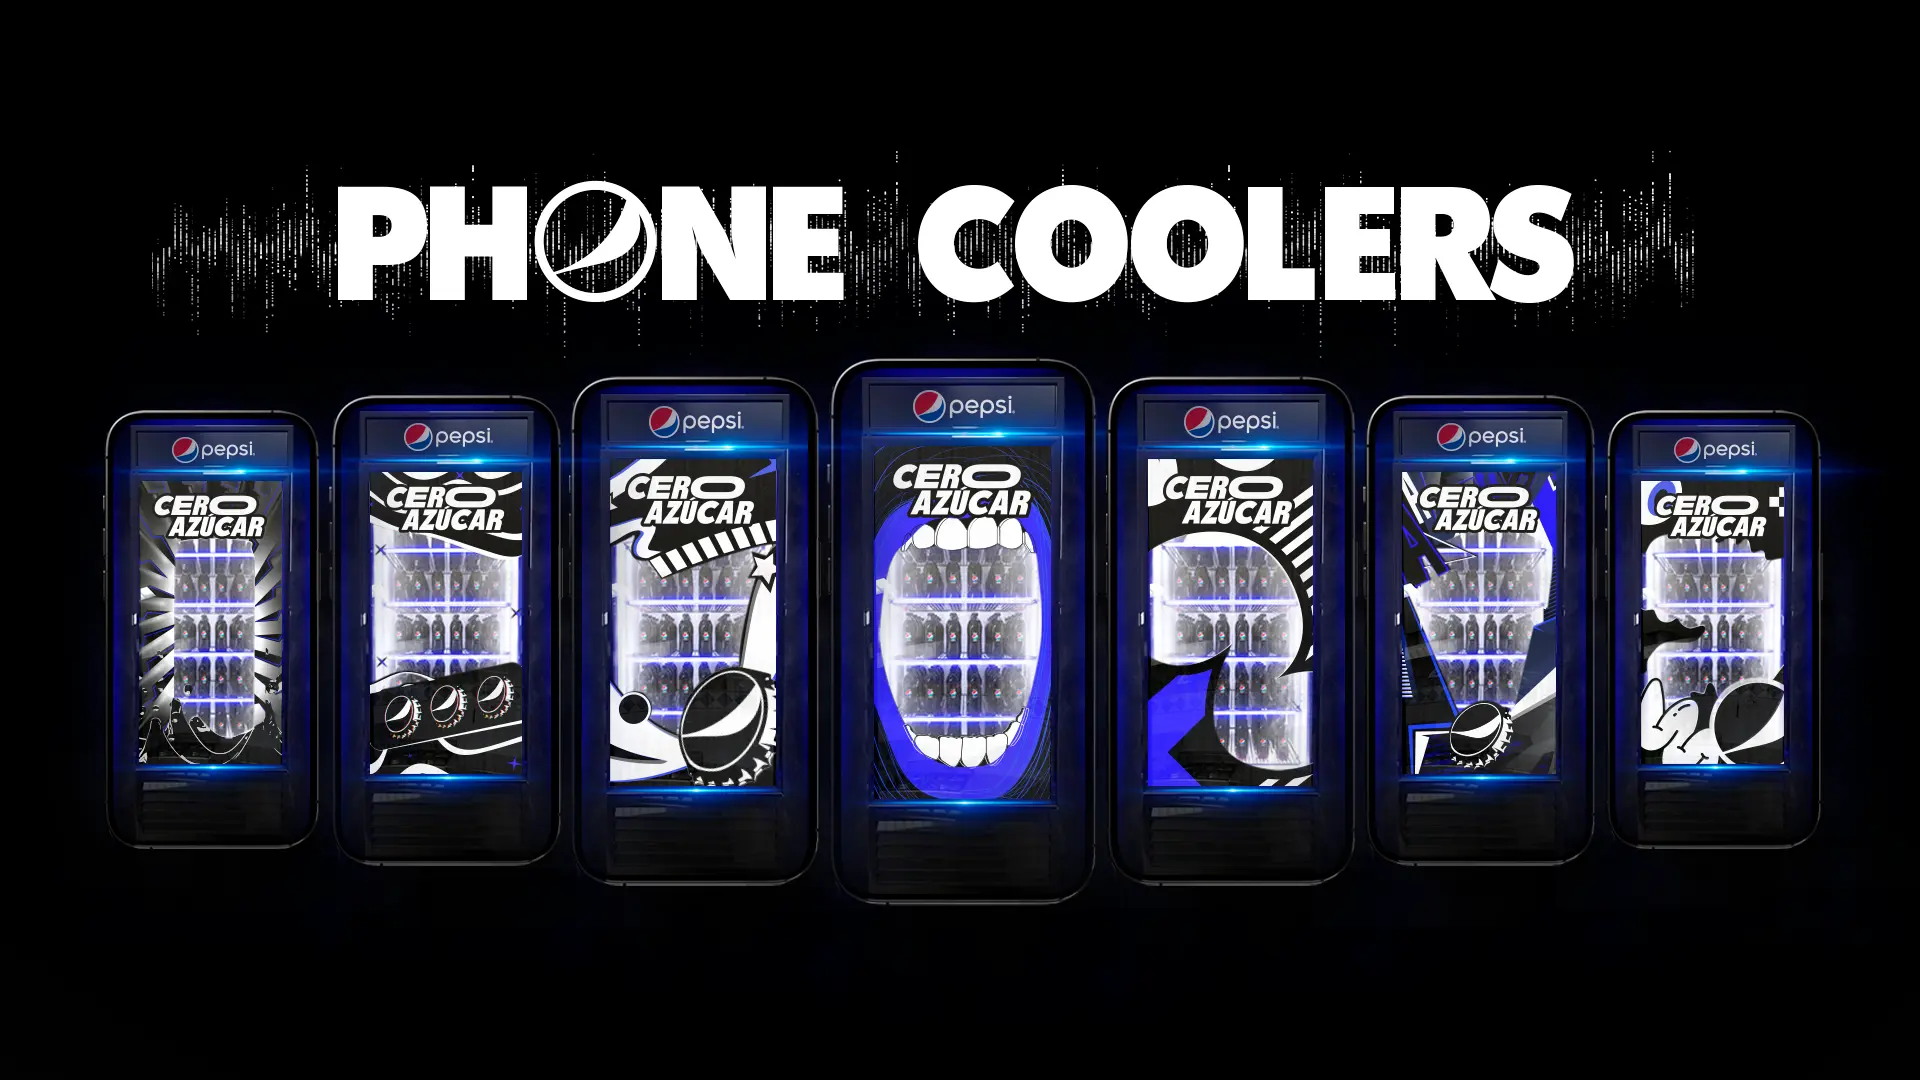 Pepsi's Innovative "Phone Coolers" Campaign: Say Goodbye to Smartphone Overheating Woes British Airways Campaigns of the World®